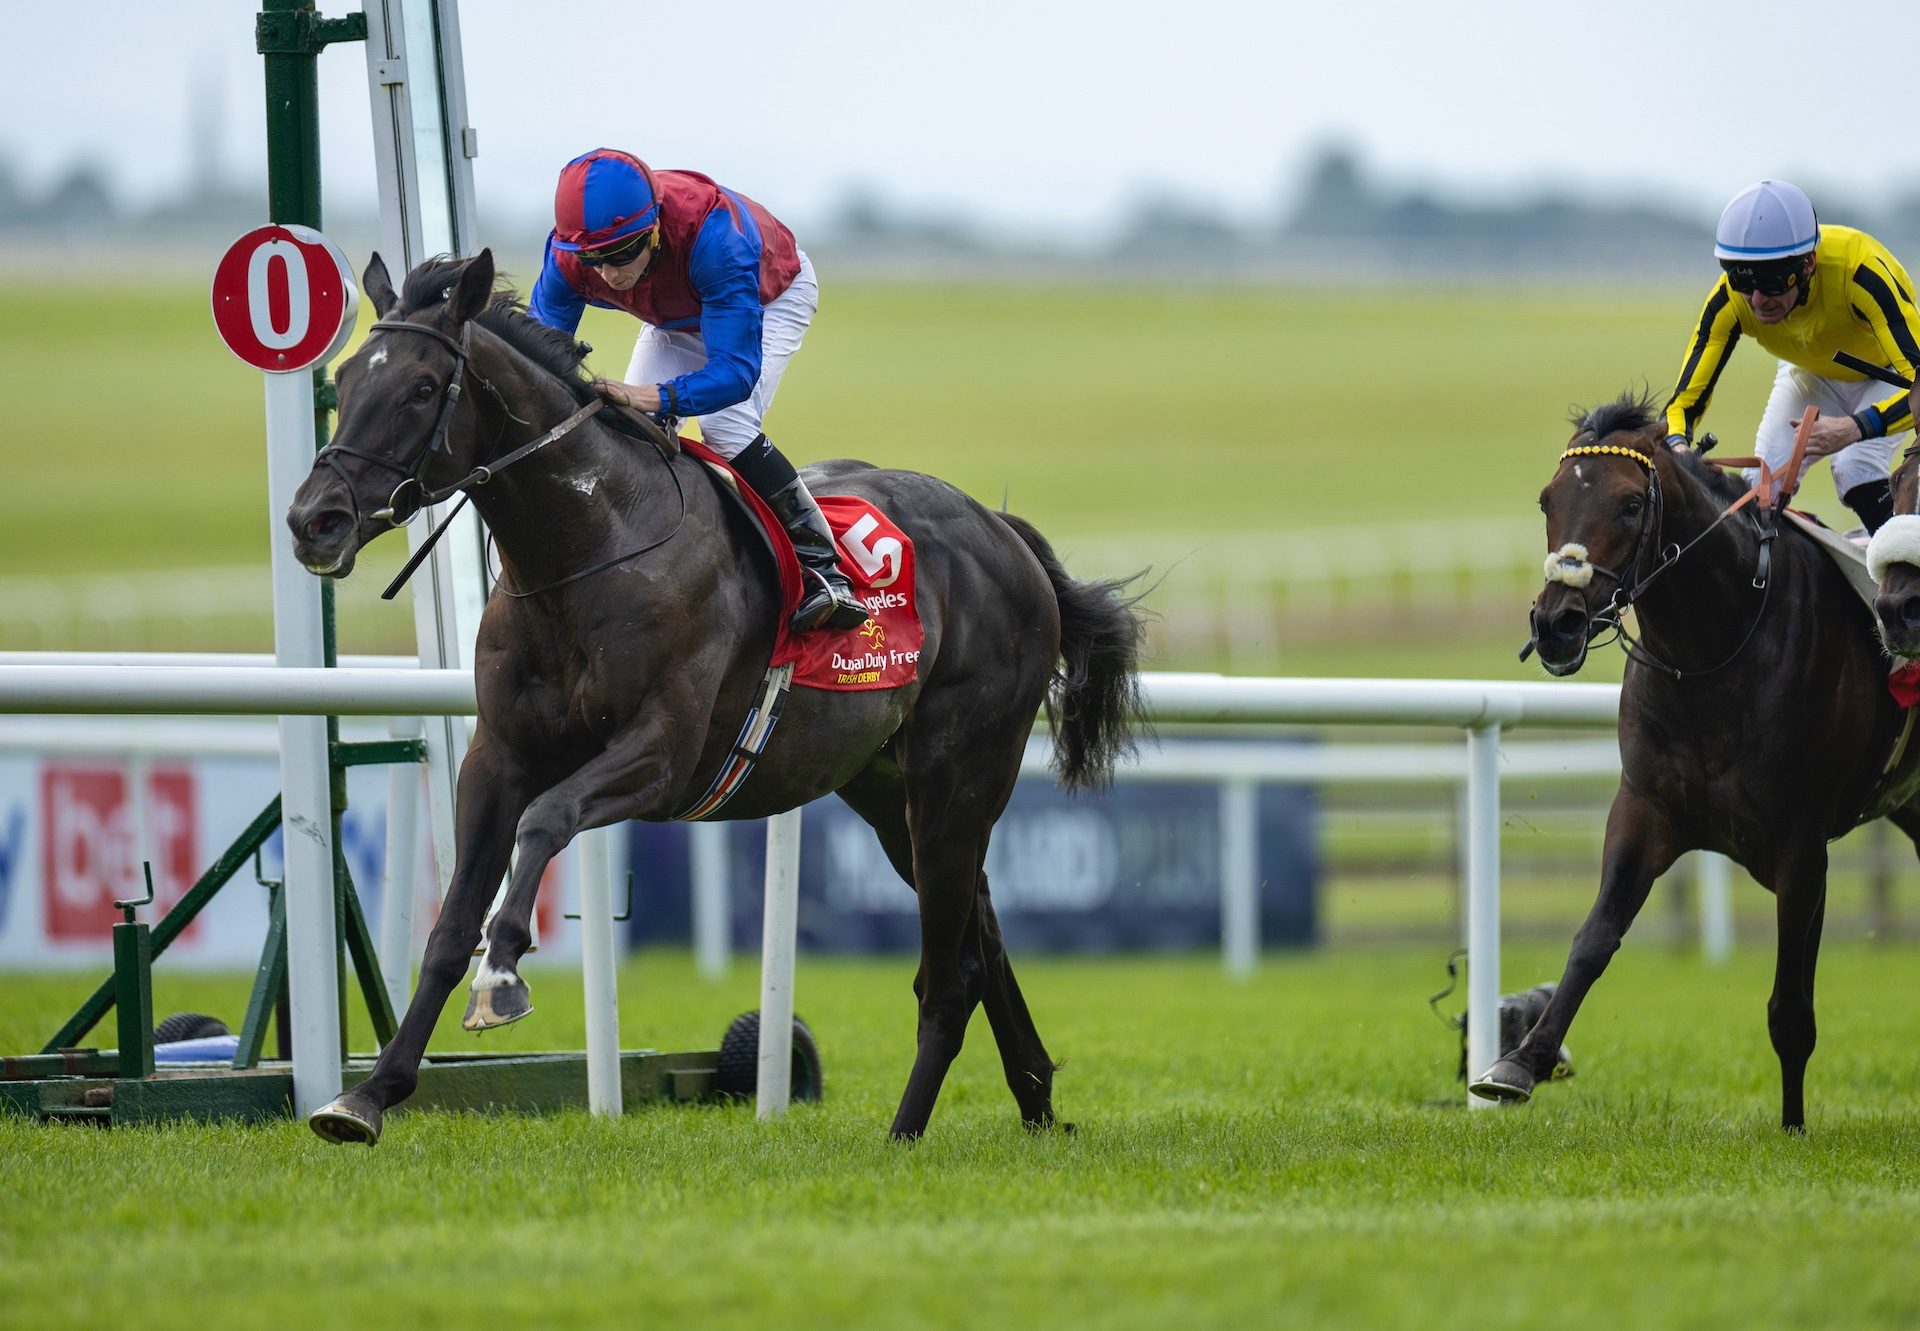 Los Angeles (Camelot) Wins The Irish Derby